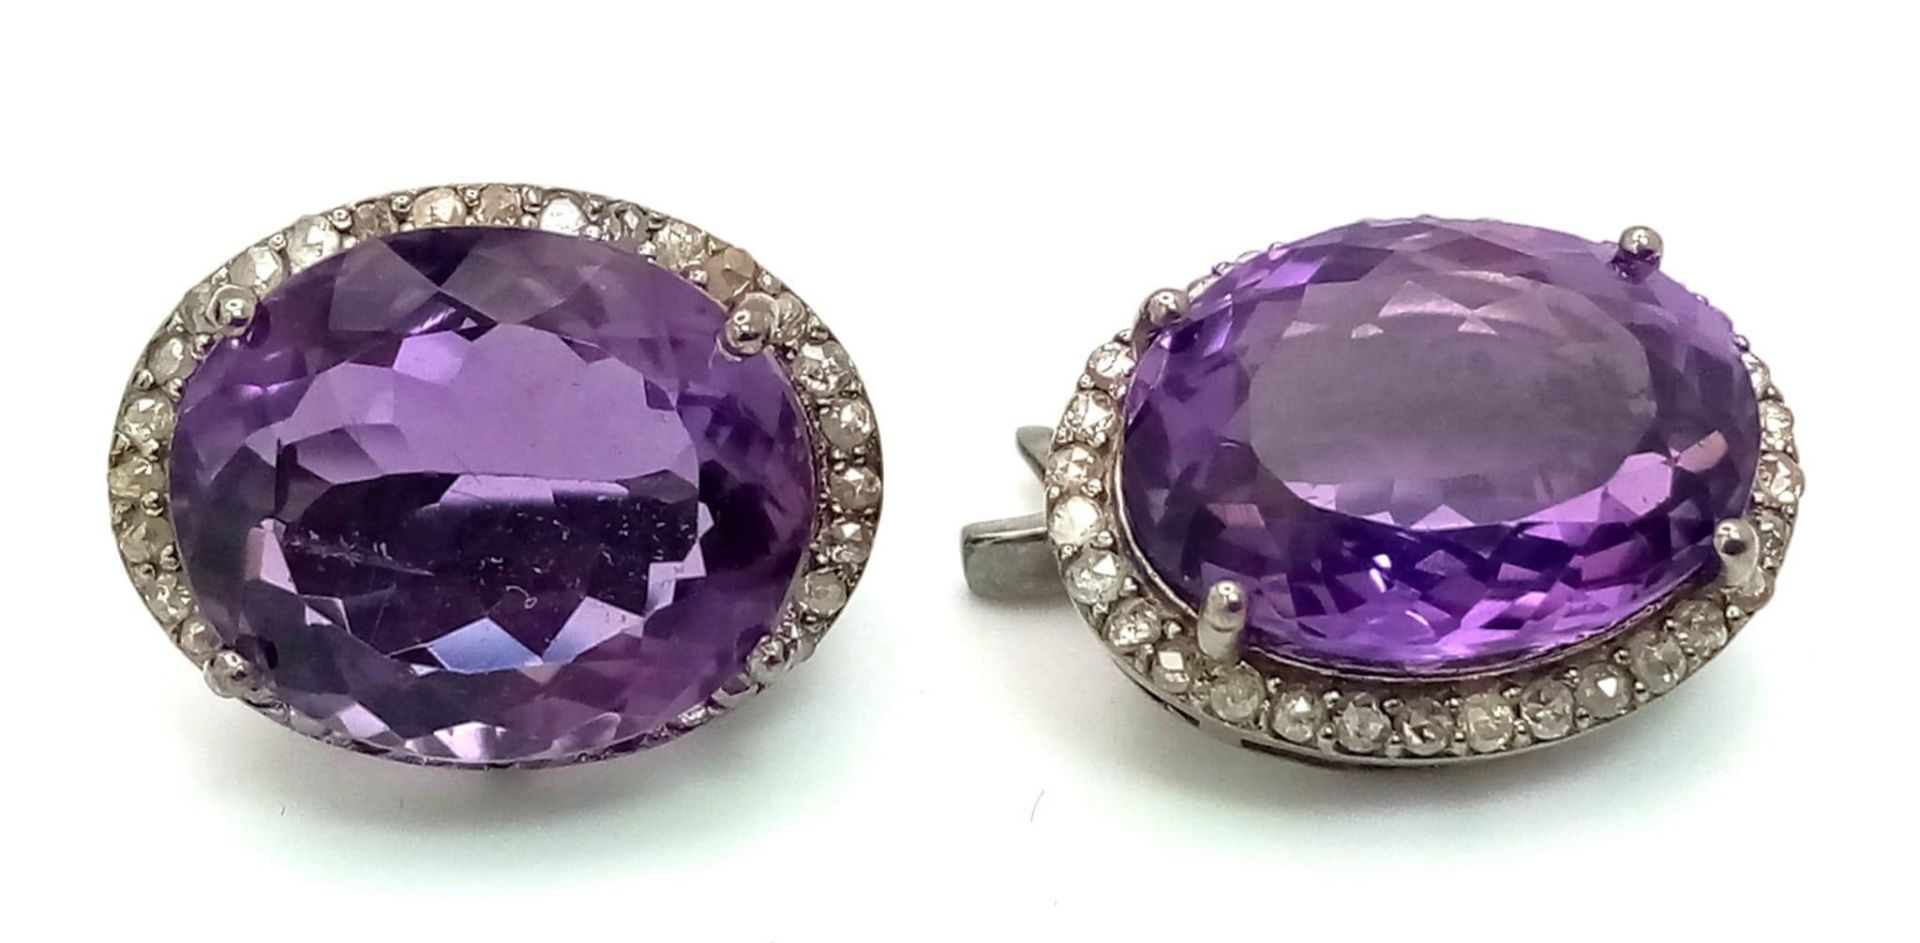 An Amethyst Gemstone Ring with a Matching Pair of Stud Earrings. Both with Diamond Accents. All - Image 4 of 6